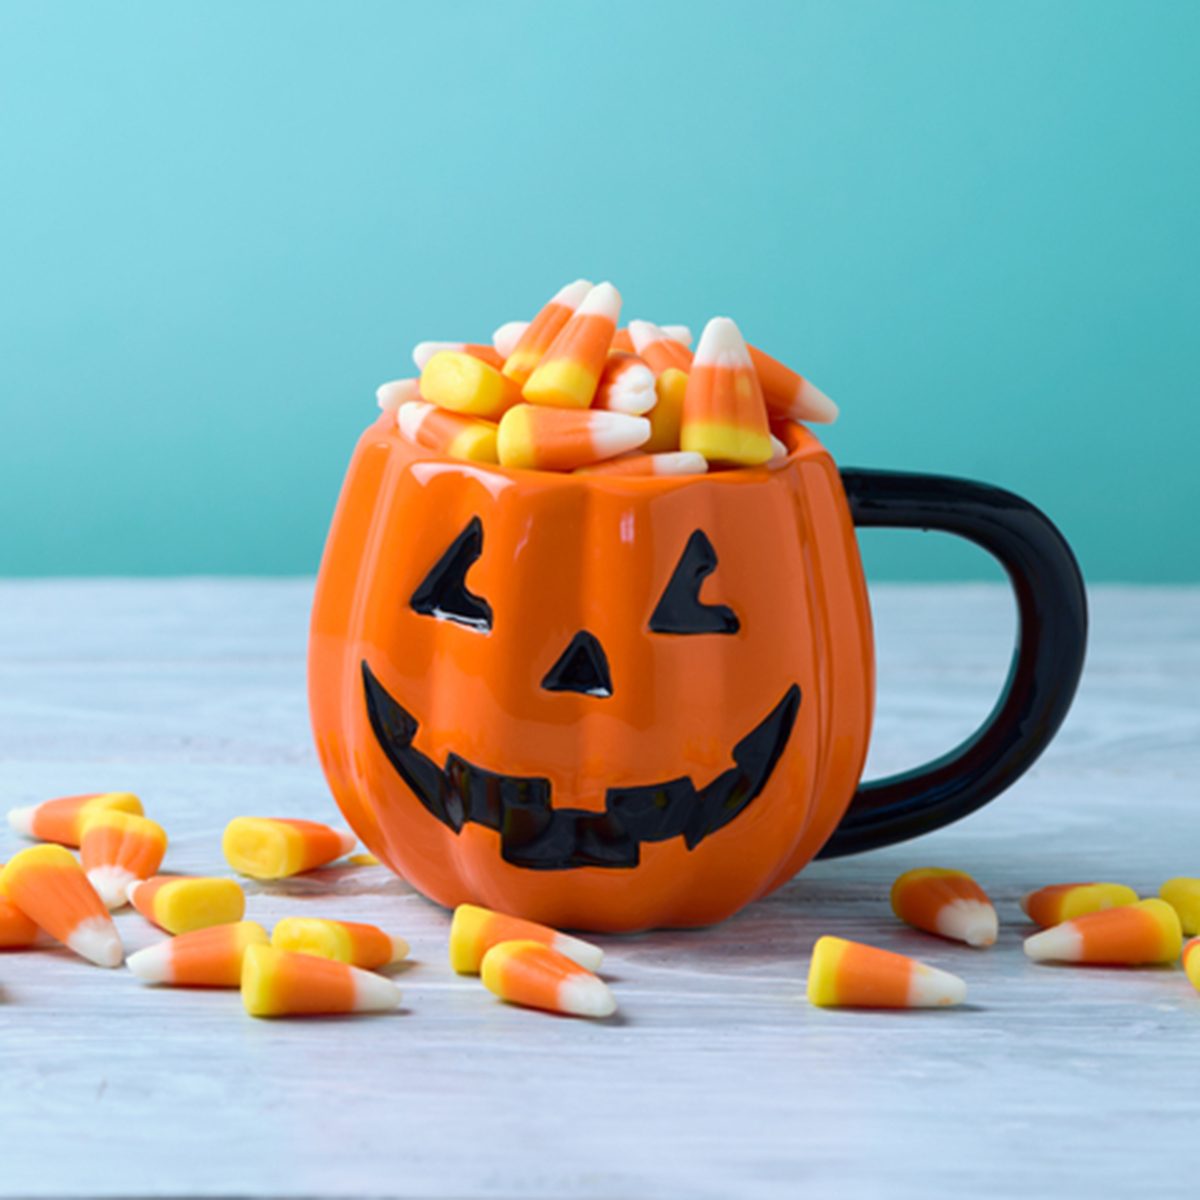 10 Interesting Facts About Candy Corn